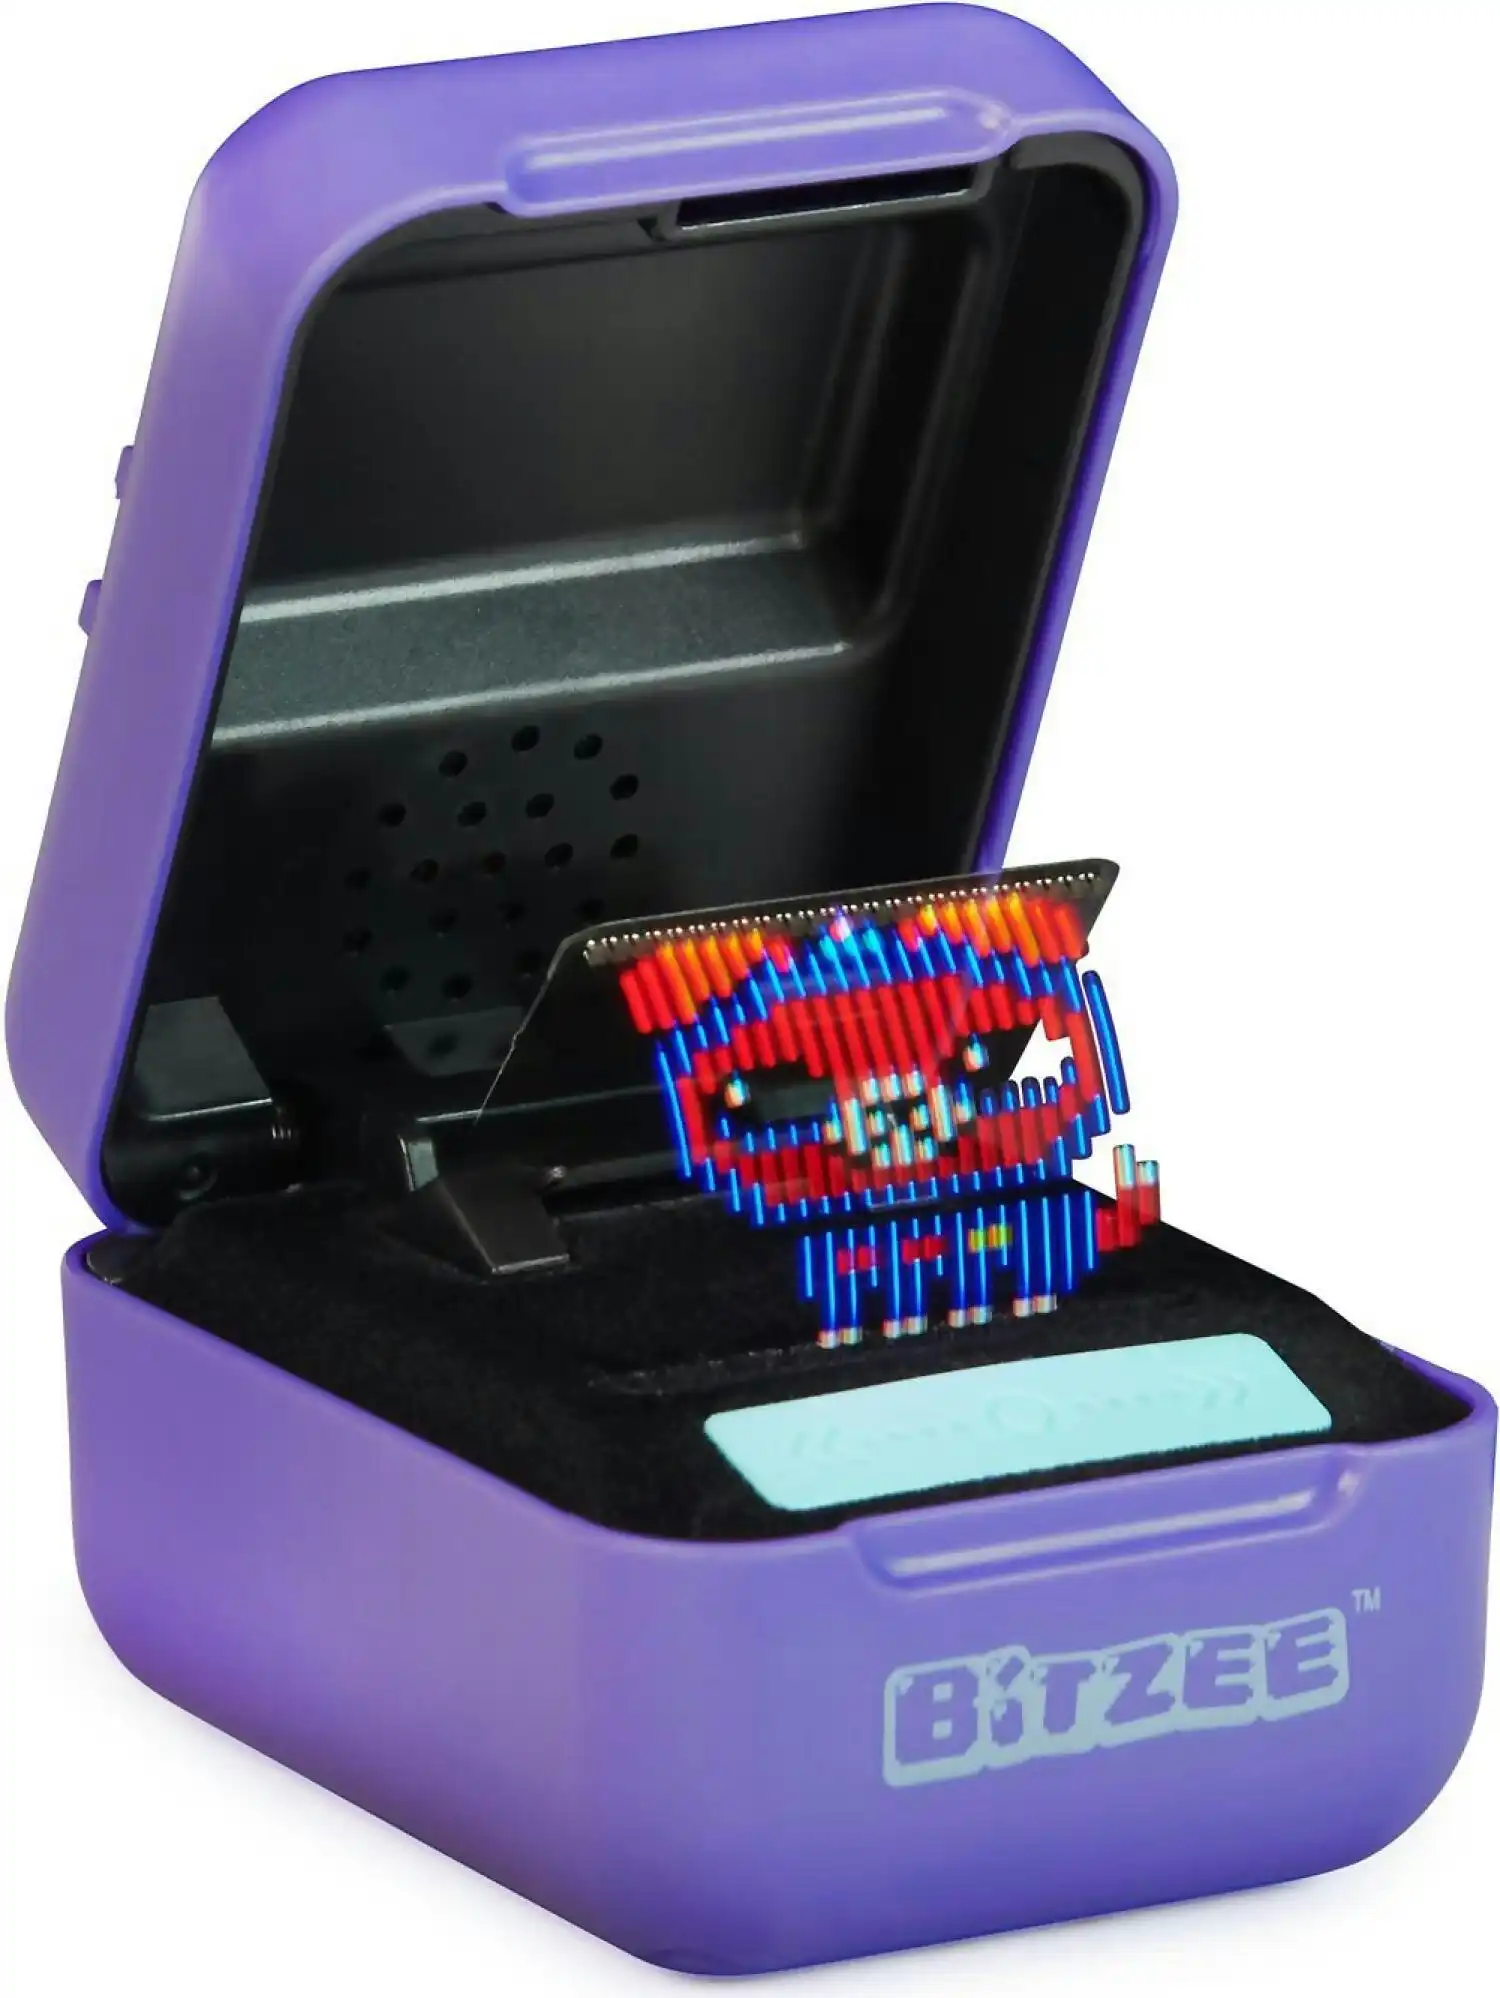 Bitzee - Interactive Toy Digital Pet And Case With 15 Animals Inside Virtual Electronic Pets React To Touch - Spin Master